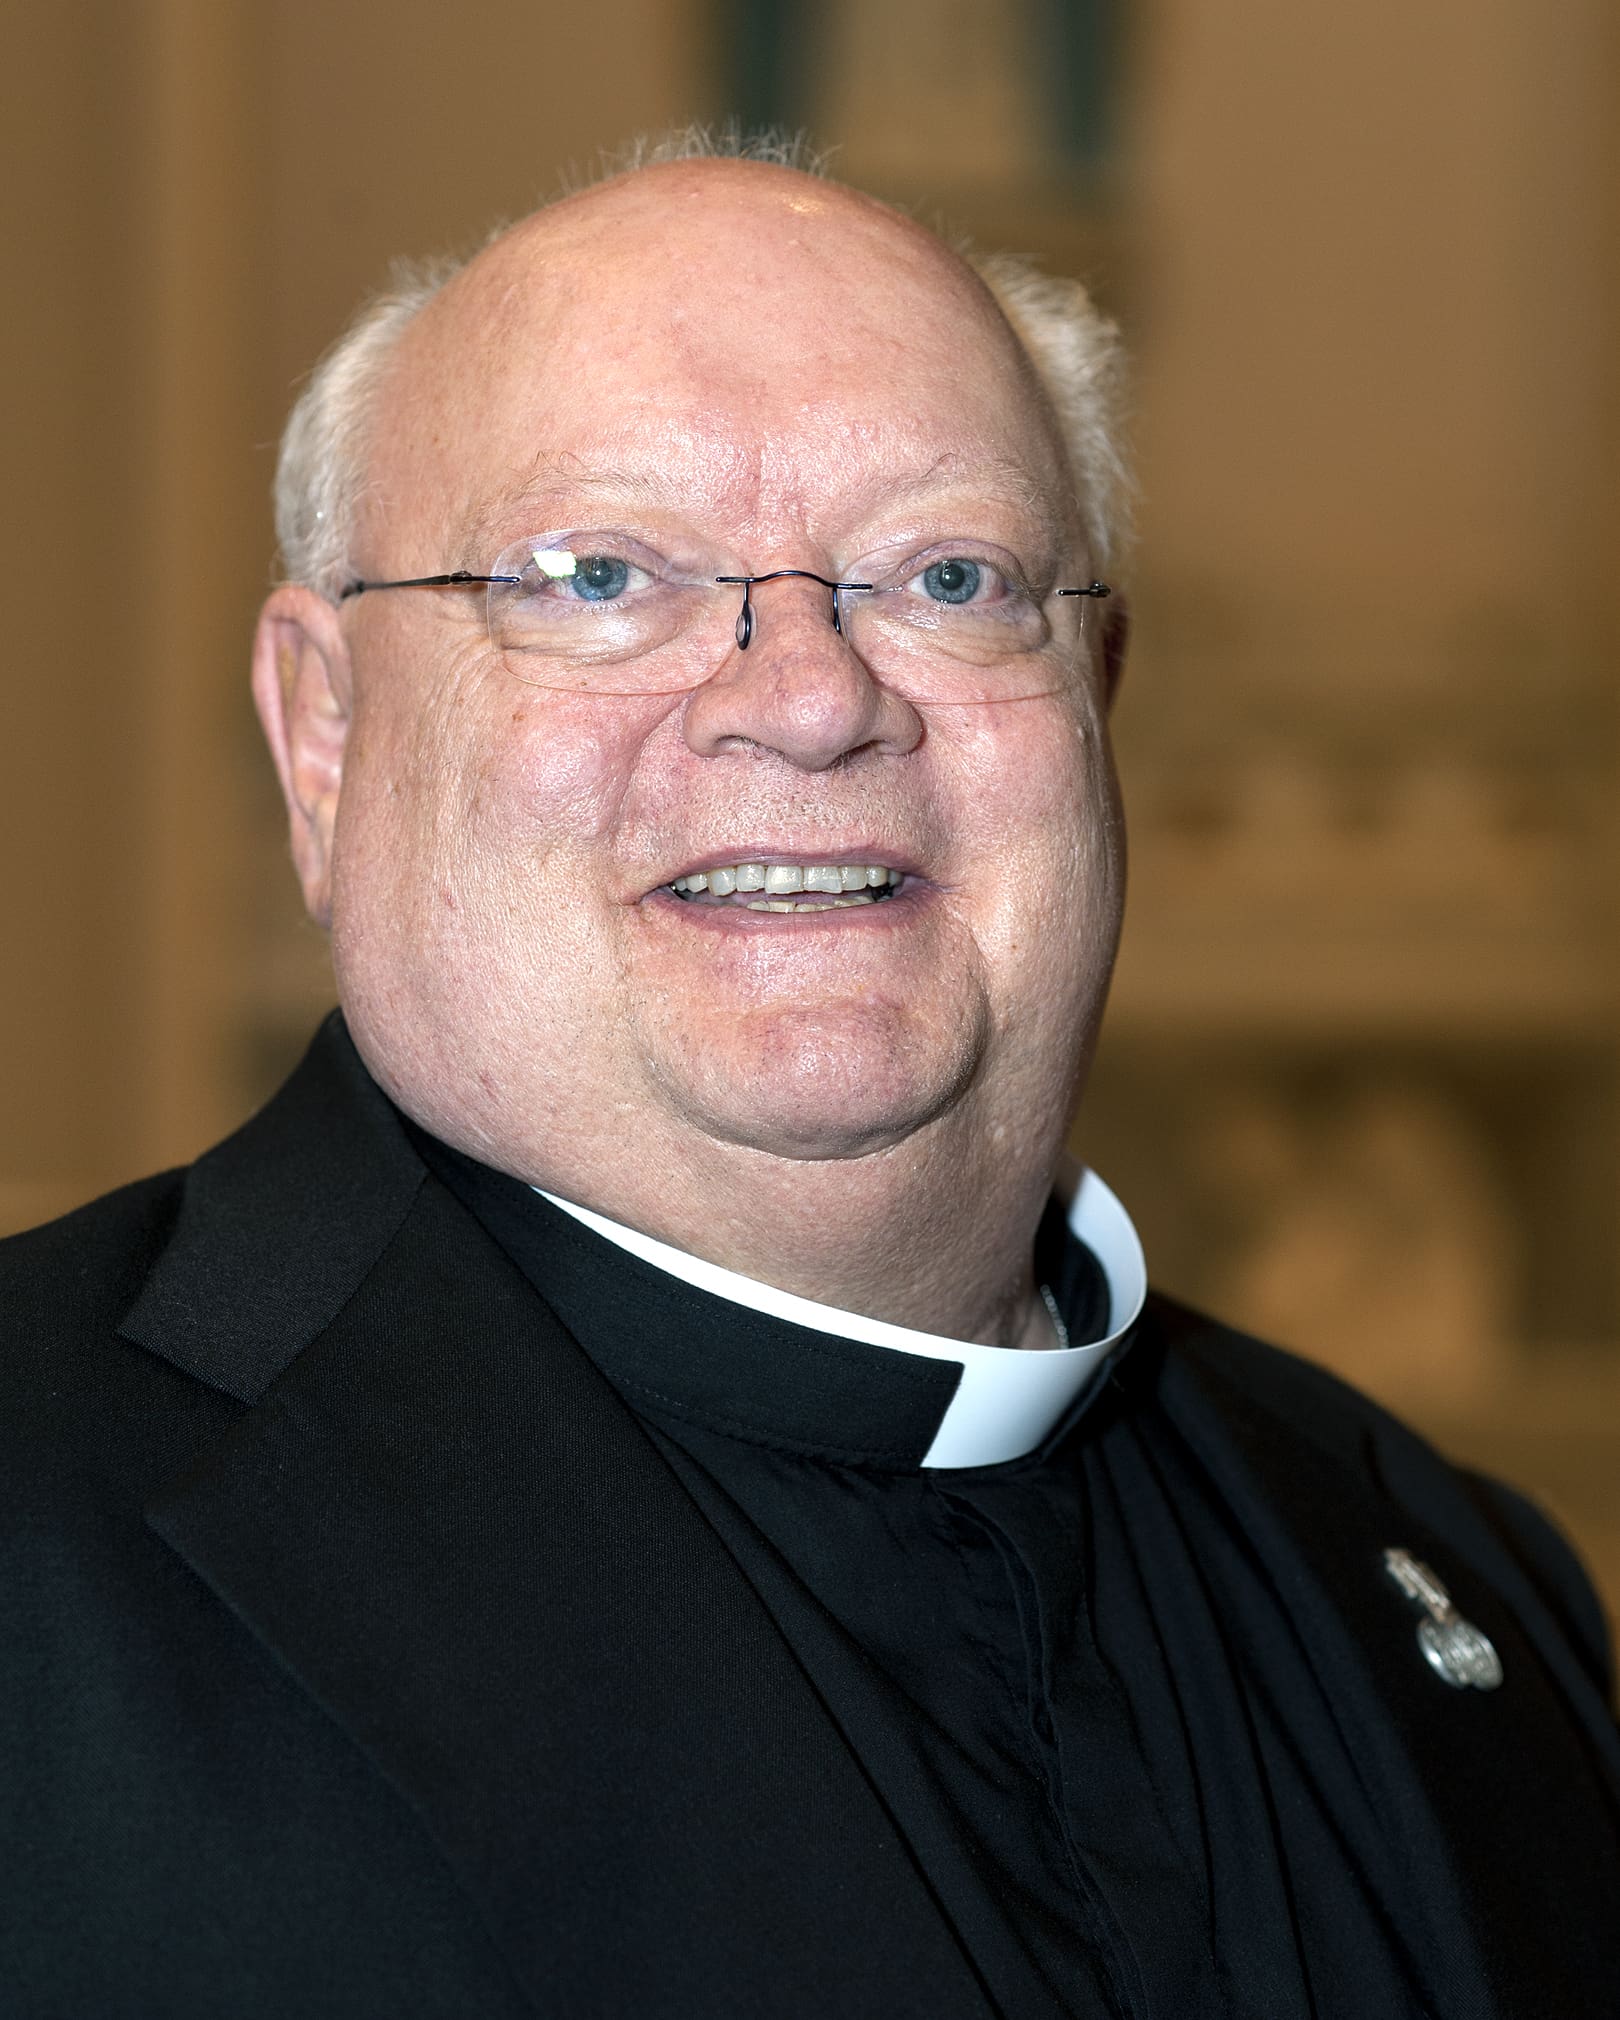 Fr. Carl Pieber offers summary of historic Assembly